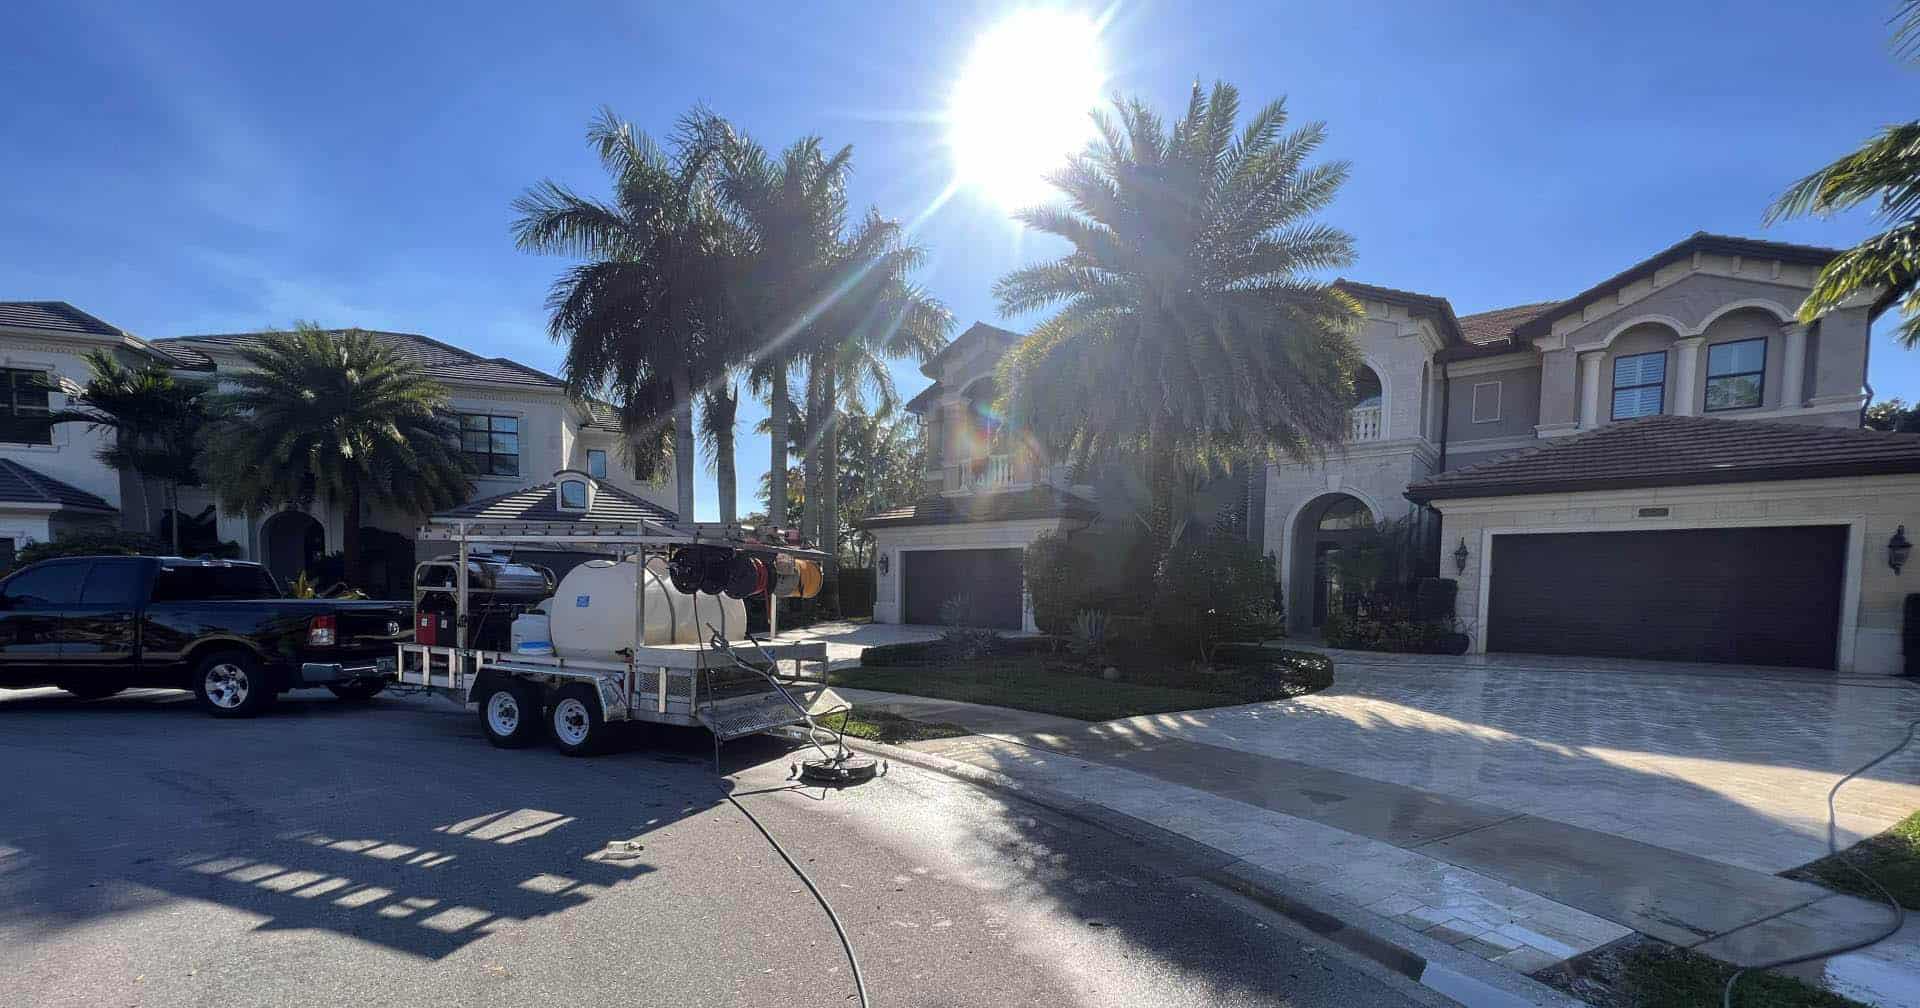 pressure washing setup in a house in Florida